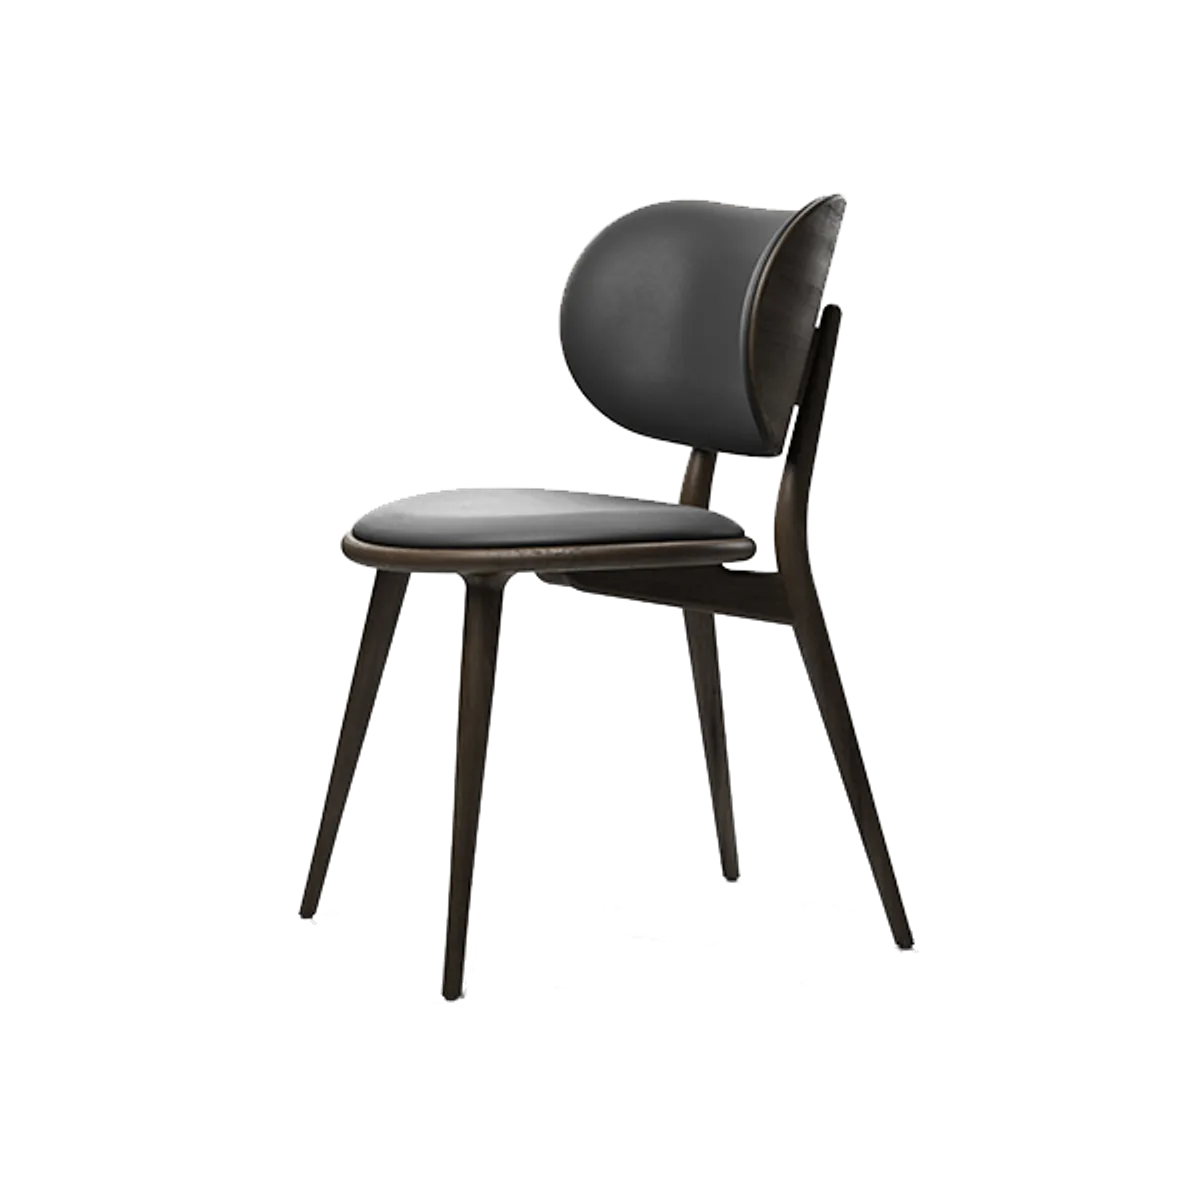 Web The Dining Chair Inside Out Contracts